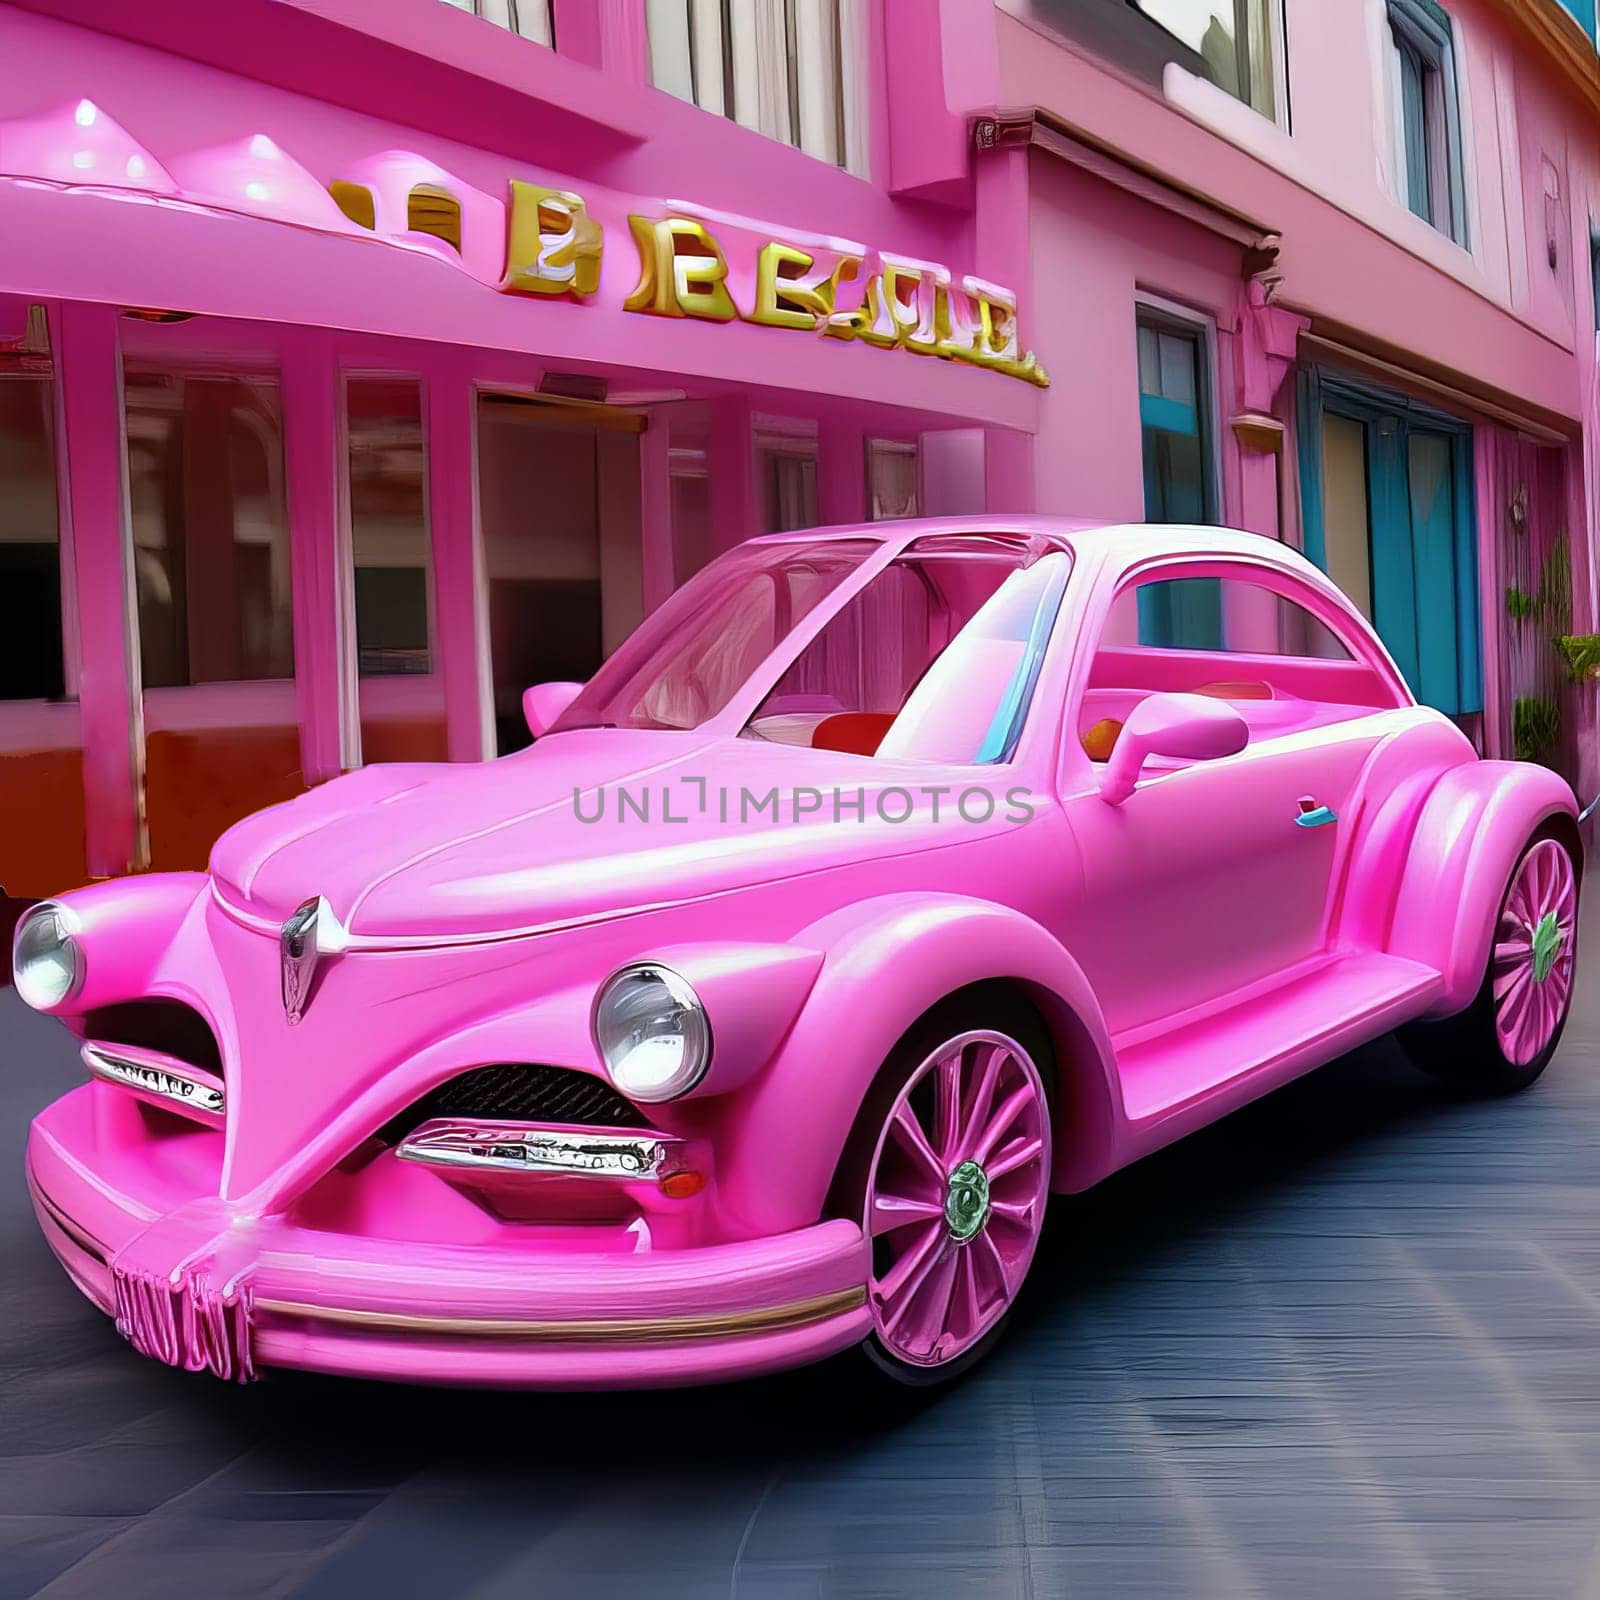 Barbie style pink car on the street. High quality photo